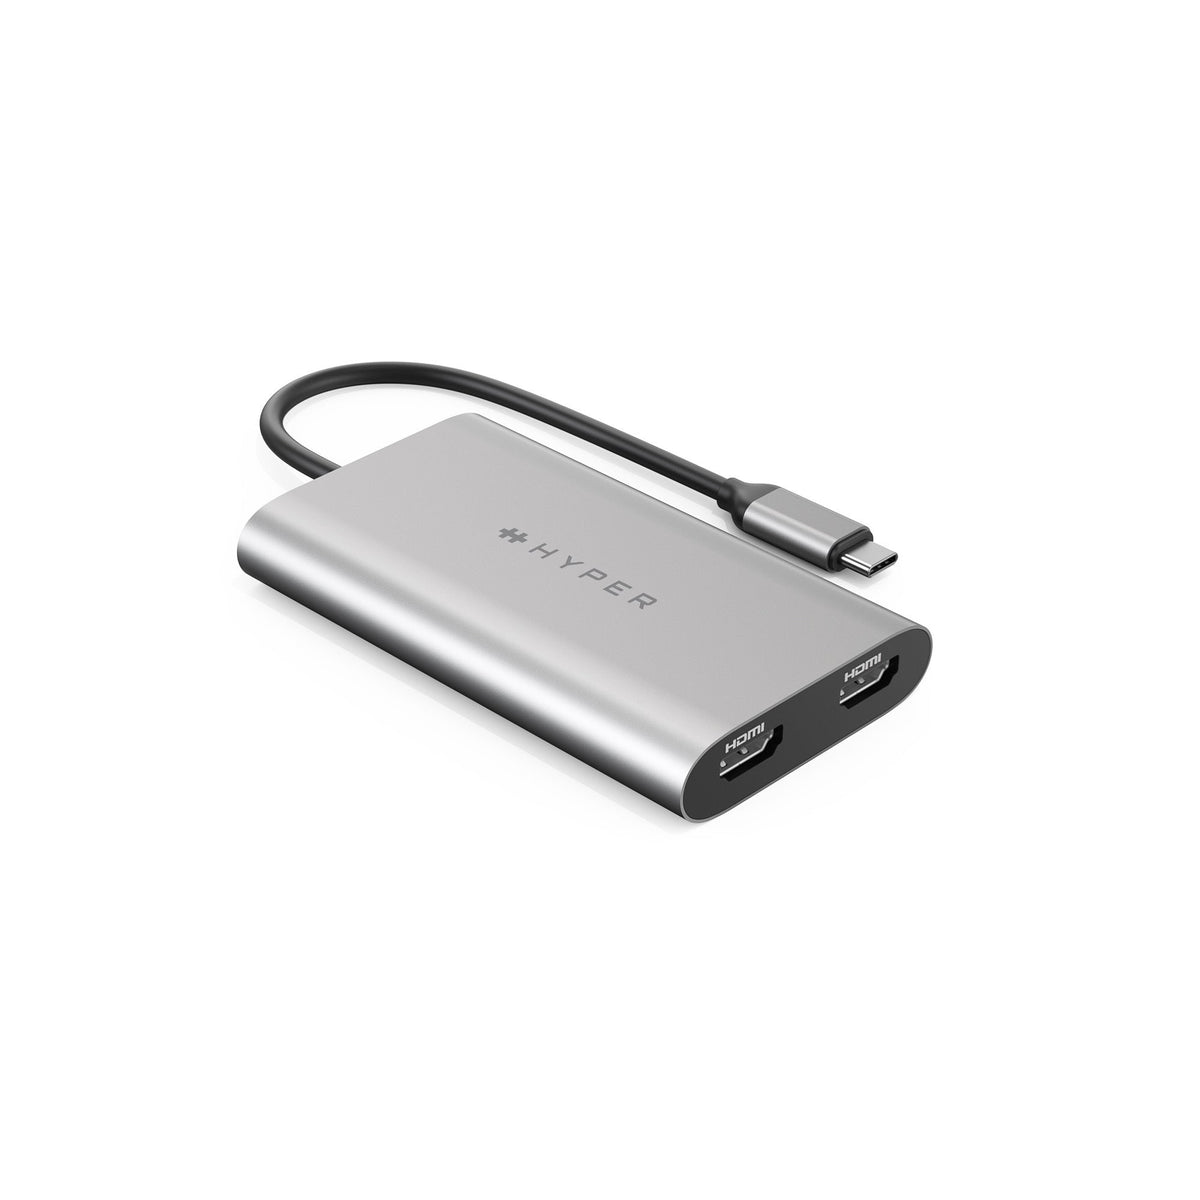 HyperDrive Dual - Video Adapter - USB-C to HDMI, USB-C - USB Power Delivery (100W), 4K30Hz (HDMI 2nd Screen), 4K60Hz (HDMI 1st Screen)